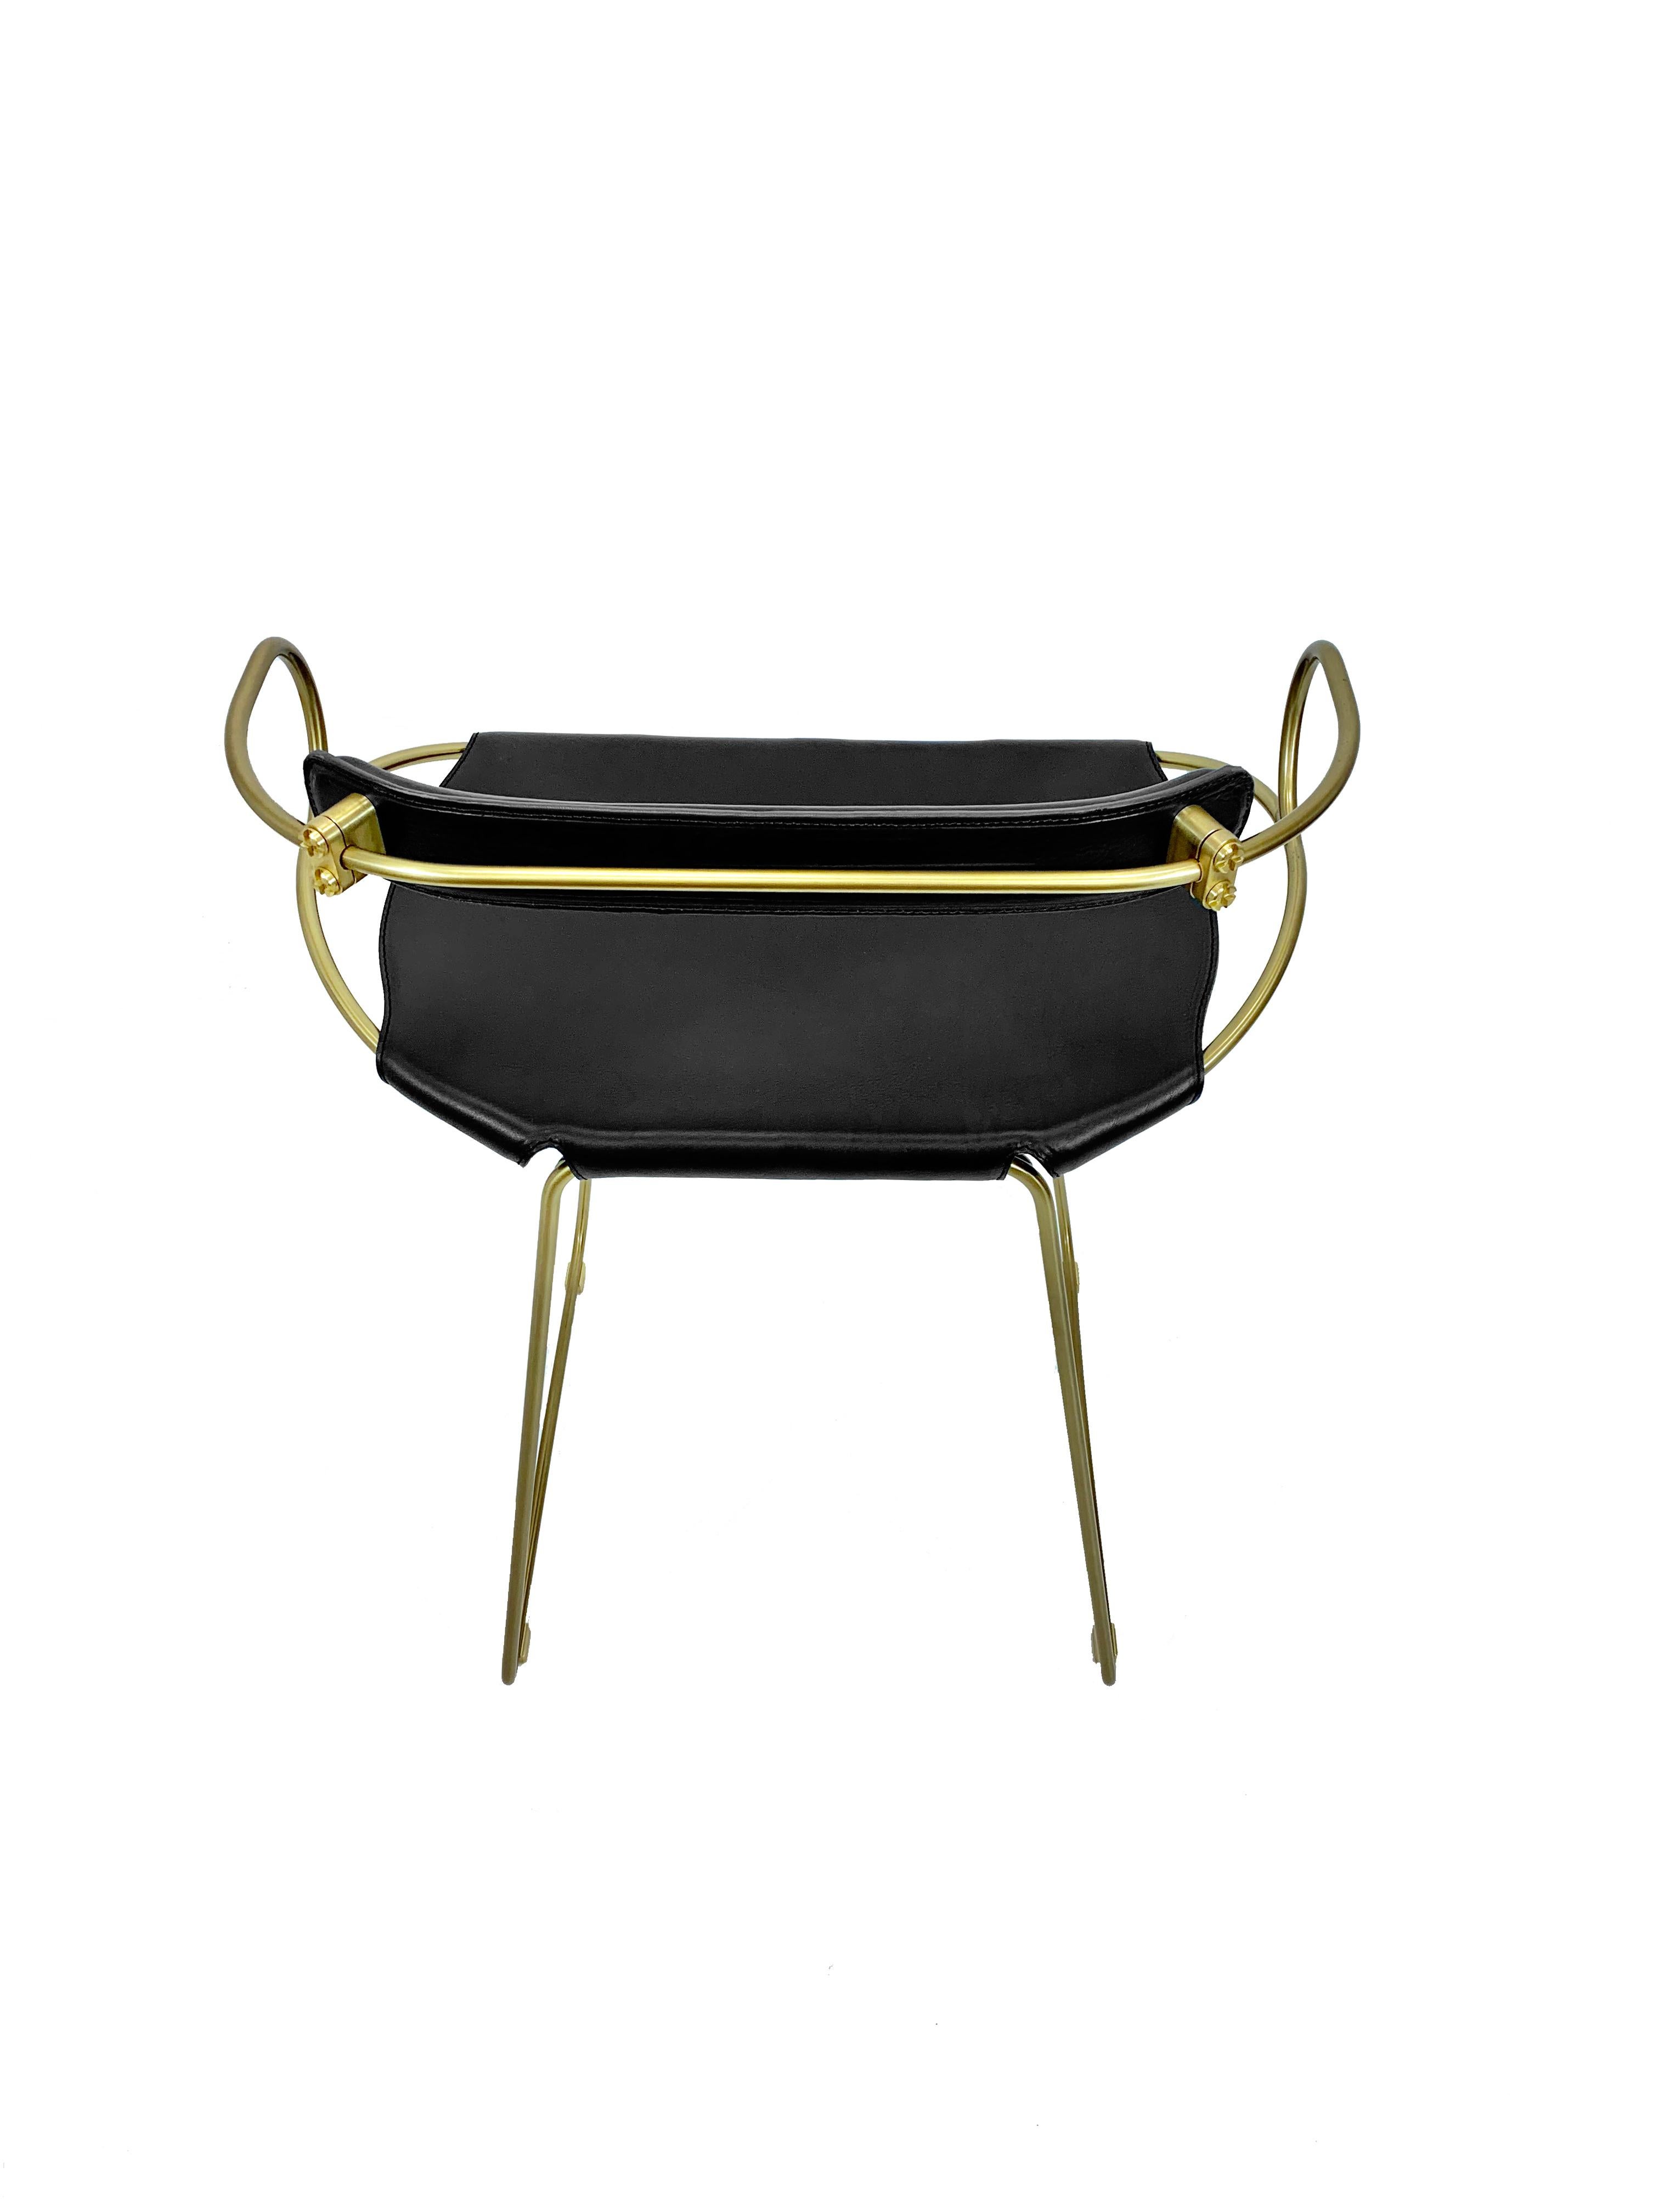 Spanish Contemporary Bar Stool w. Backrest Aged Brass Metal and Black Leather For Sale